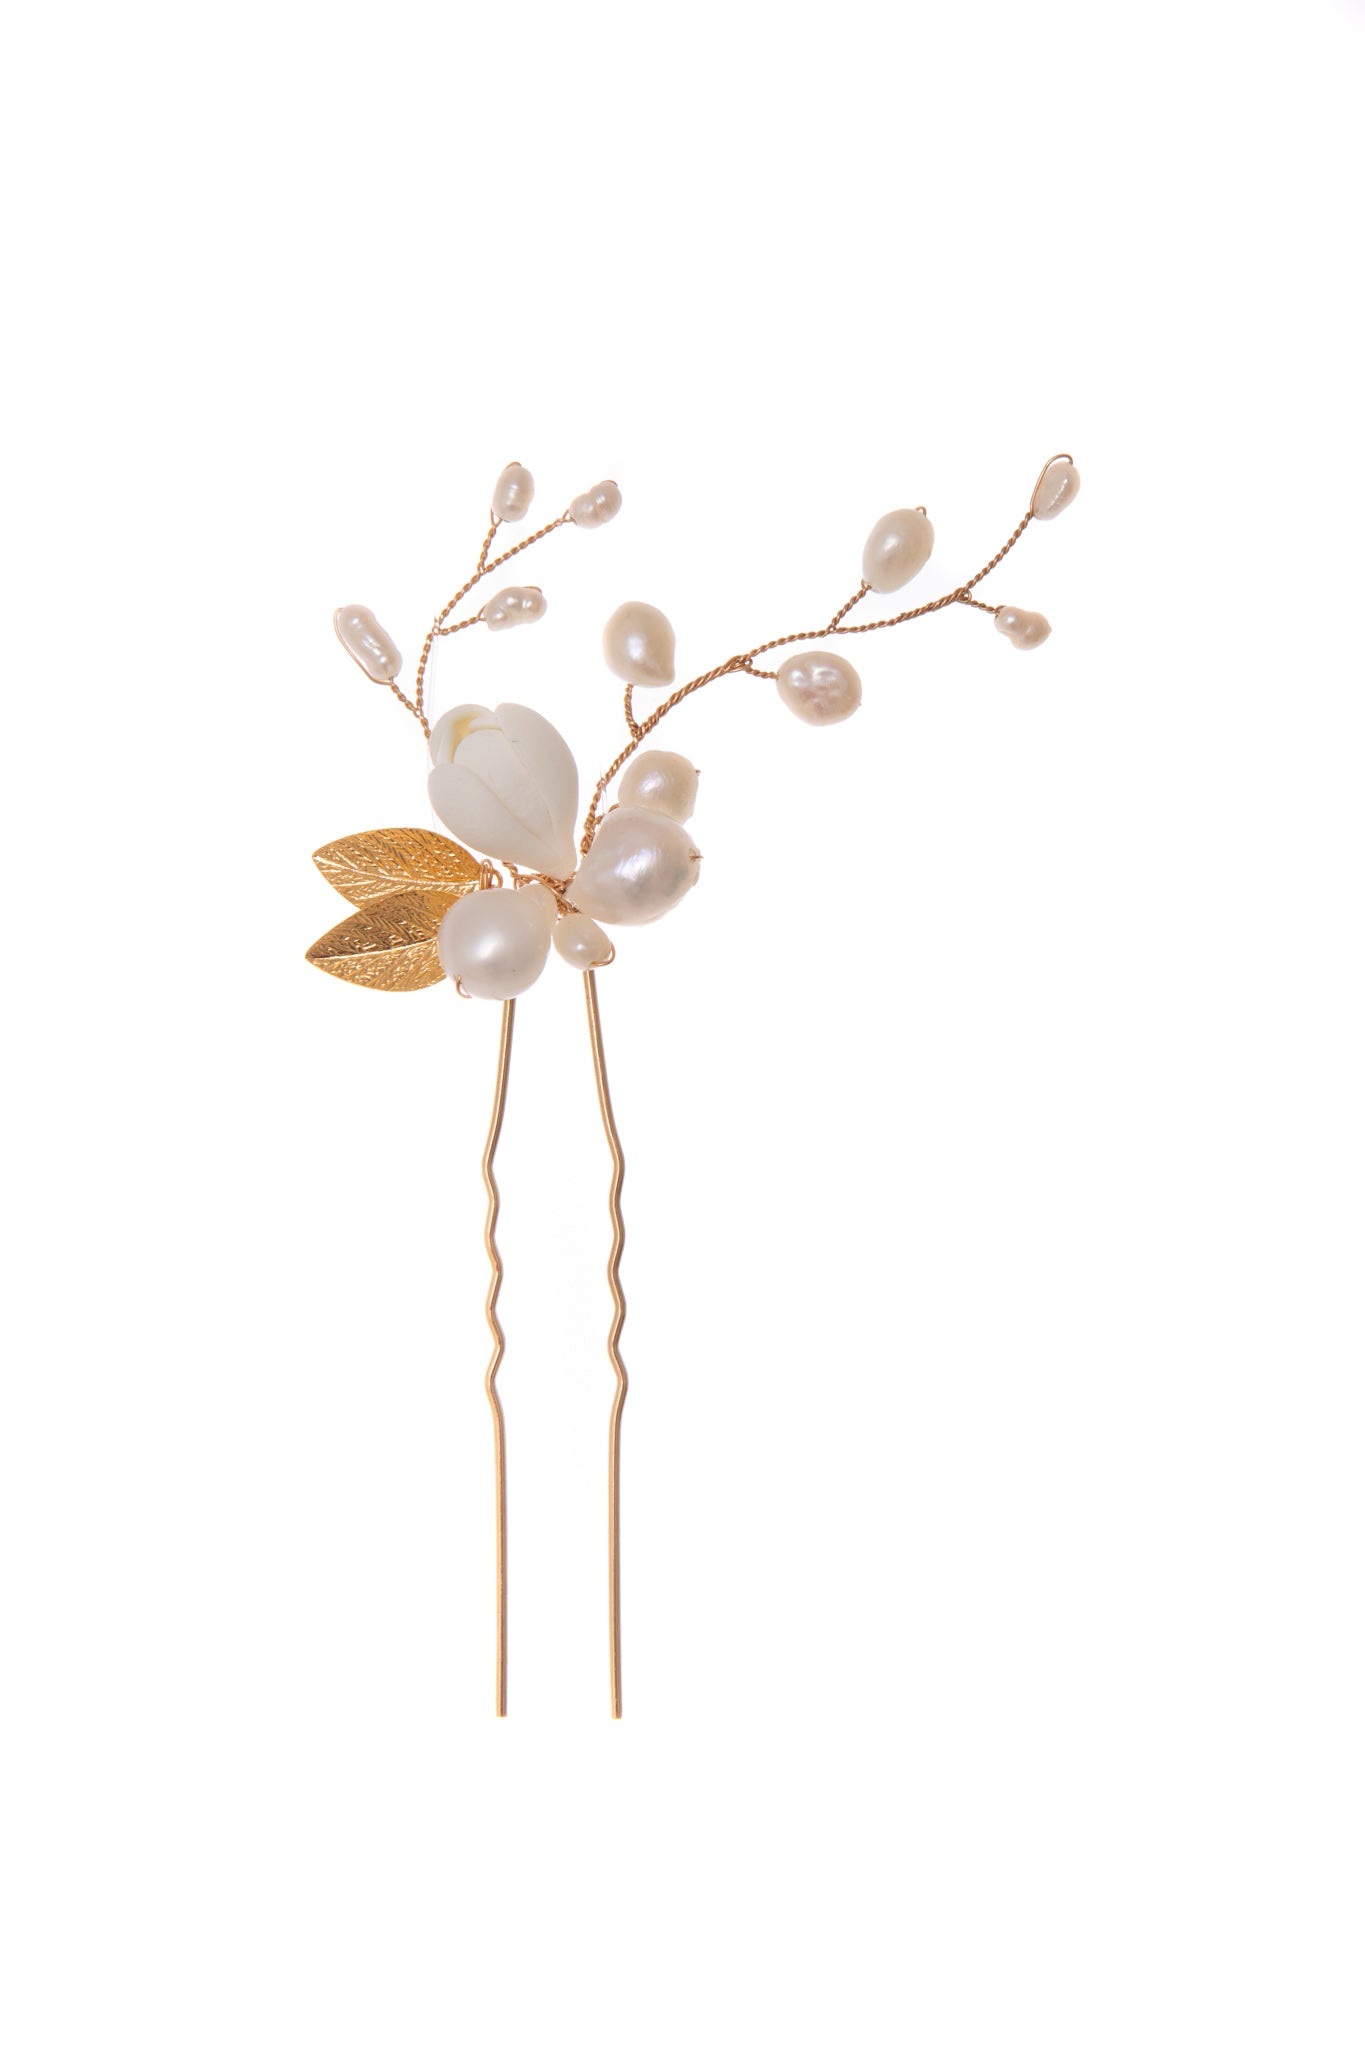 Wildflower hair pin features delicate petals and freshwater pearls that flare out gracefully from the central bud, creating a subtle yet sophisticated piece that will bring an exquisite finish to any look